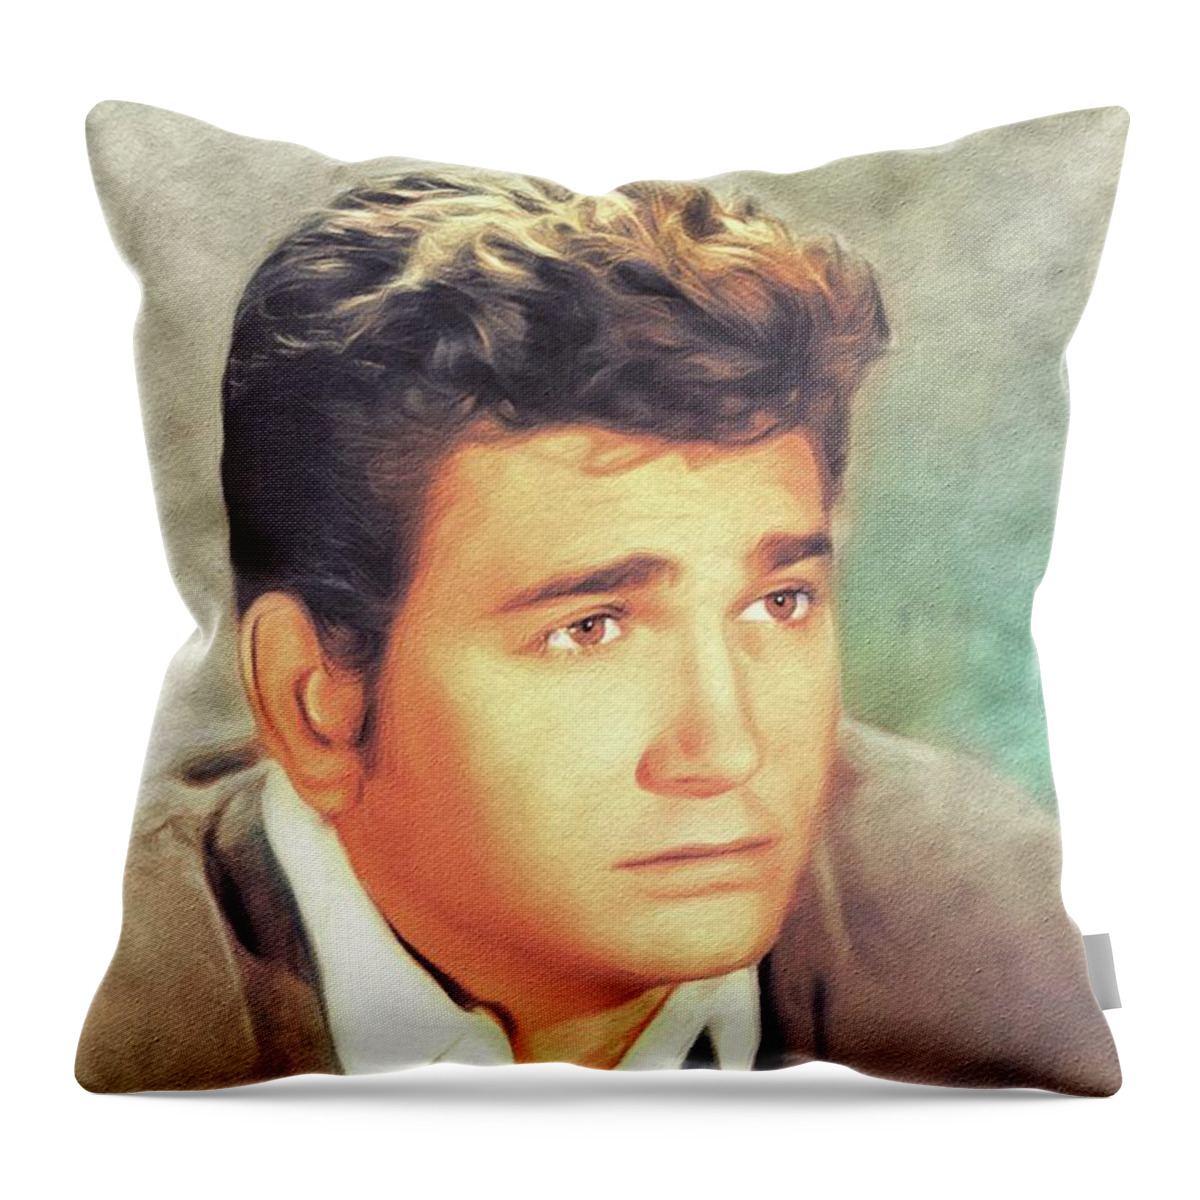 Michael Throw Pillow featuring the painting Michael Landon, Hollywood Legend #2 by Esoterica Art Agency